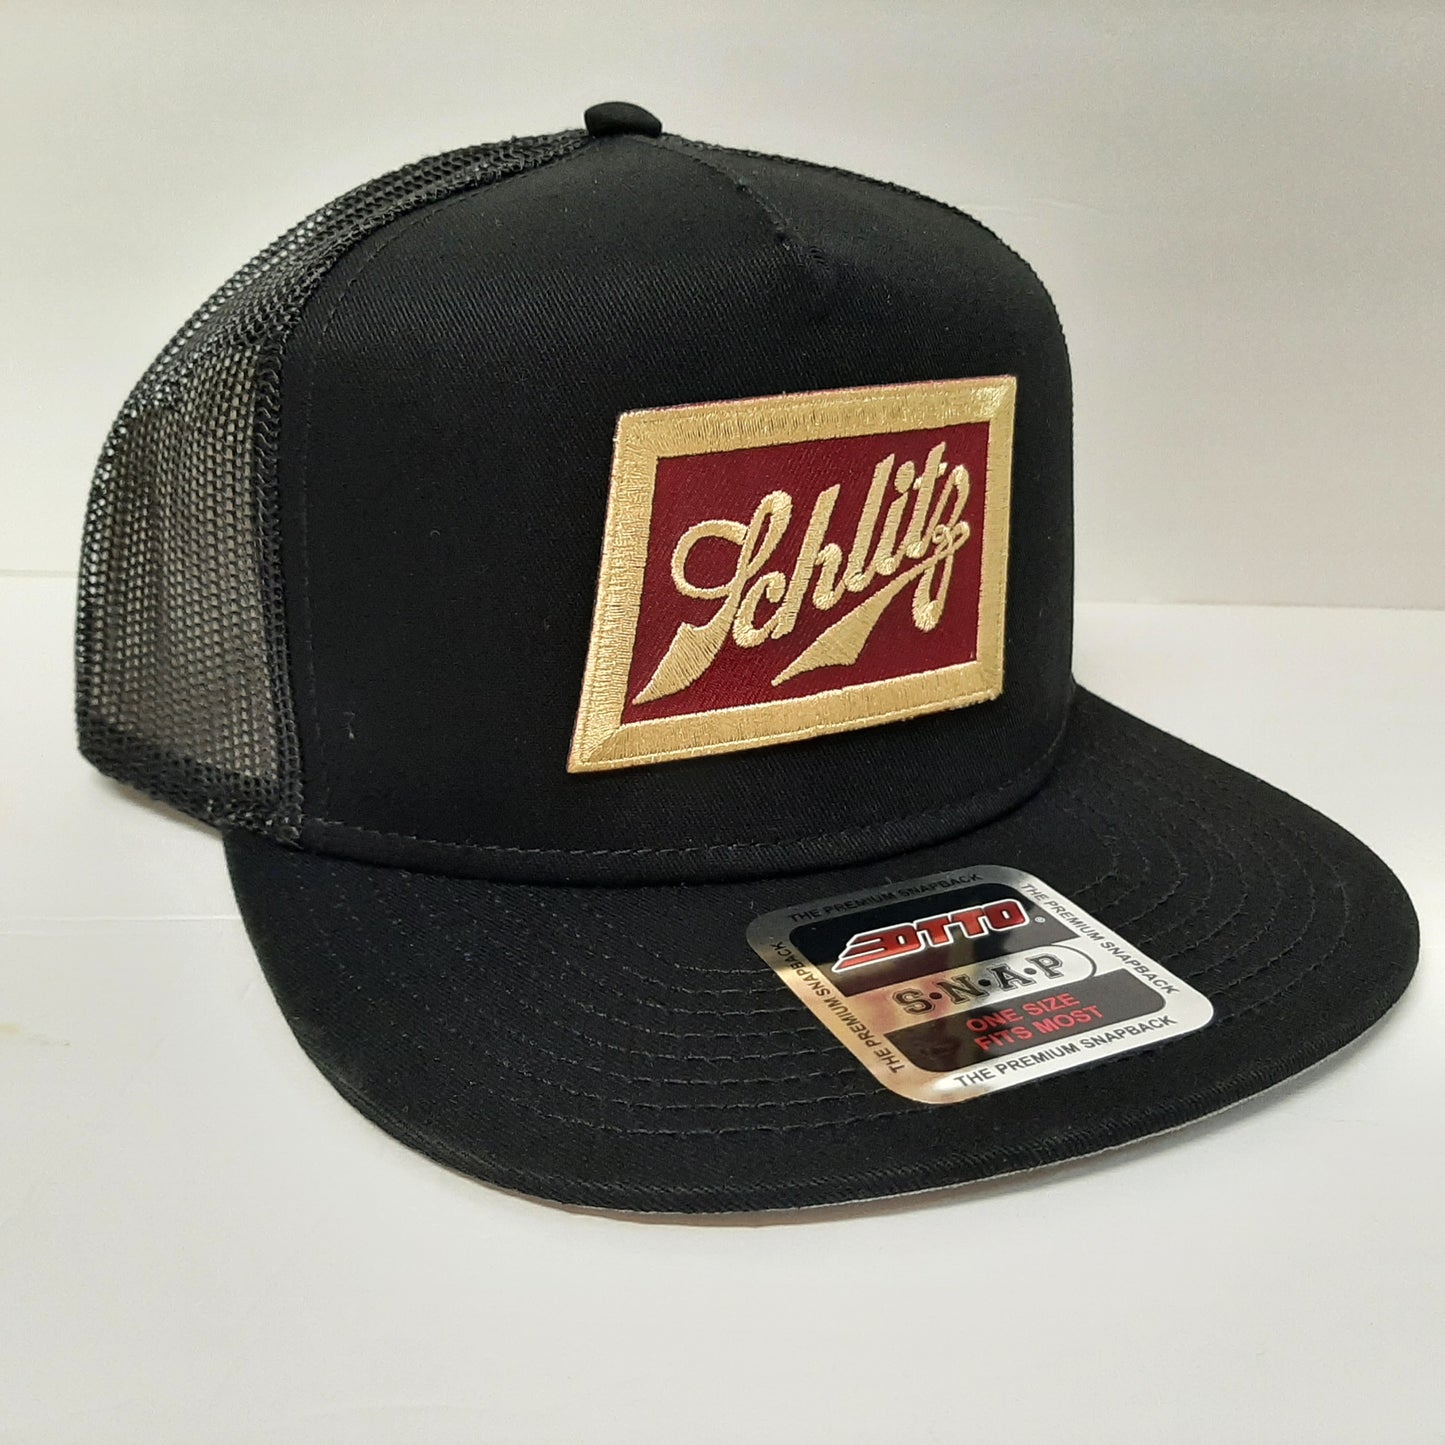 Schlitz Beer Embroidered Patch Flat Bill Snapback Mesh Hat Cap OTTO